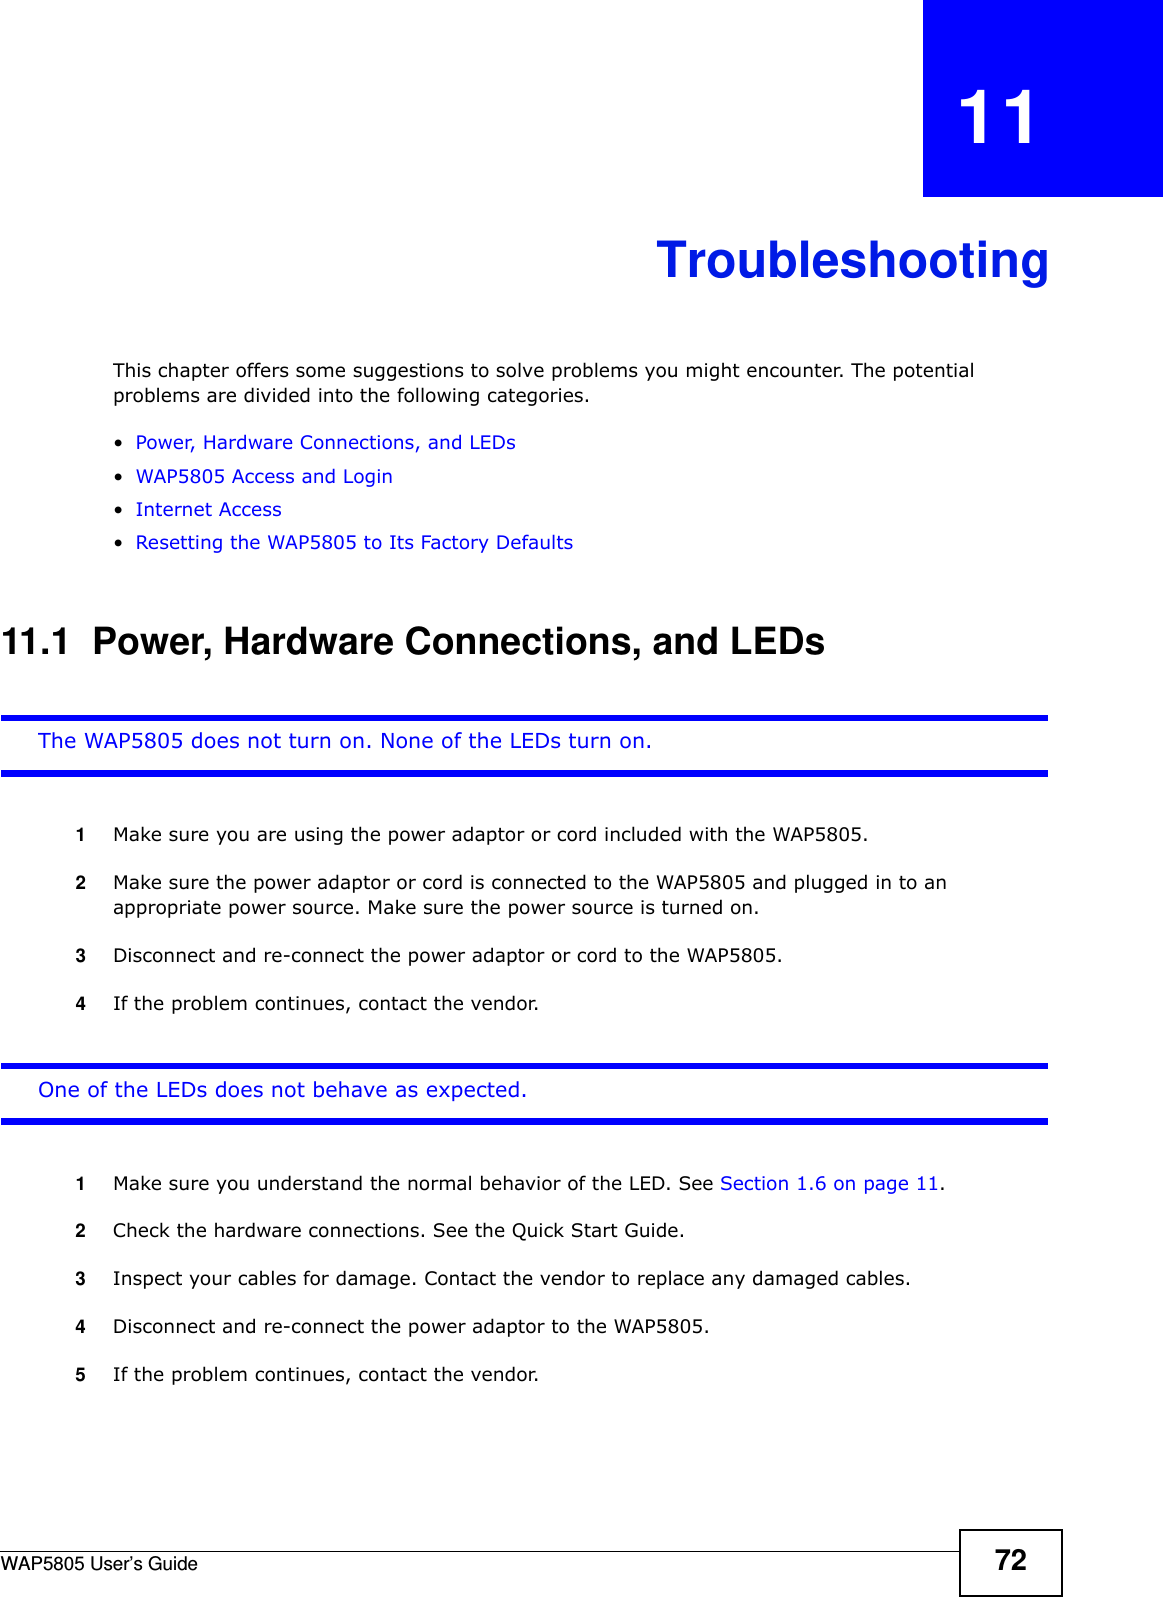 WAP5805 User’s Guide 72CHAPTER   11TroubleshootingThis chapter offers some suggestions to solve problems you might encounter. The potential problems are divided into the following categories. •Power, Hardware Connections, and LEDs•WAP5805 Access and Login•Internet Access•Resetting the WAP5805 to Its Factory Defaults11.1  Power, Hardware Connections, and LEDsThe WAP5805 does not turn on. None of the LEDs turn on.1Make sure you are using the power adaptor or cord included with the WAP5805.2Make sure the power adaptor or cord is connected to the WAP5805 and plugged in to an appropriate power source. Make sure the power source is turned on.3Disconnect and re-connect the power adaptor or cord to the WAP5805.4If the problem continues, contact the vendor.One of the LEDs does not behave as expected.1Make sure you understand the normal behavior of the LED. See Section 1.6 on page 11.2Check the hardware connections. See the Quick Start Guide. 3Inspect your cables for damage. Contact the vendor to replace any damaged cables.4Disconnect and re-connect the power adaptor to the WAP5805. 5If the problem continues, contact the vendor.